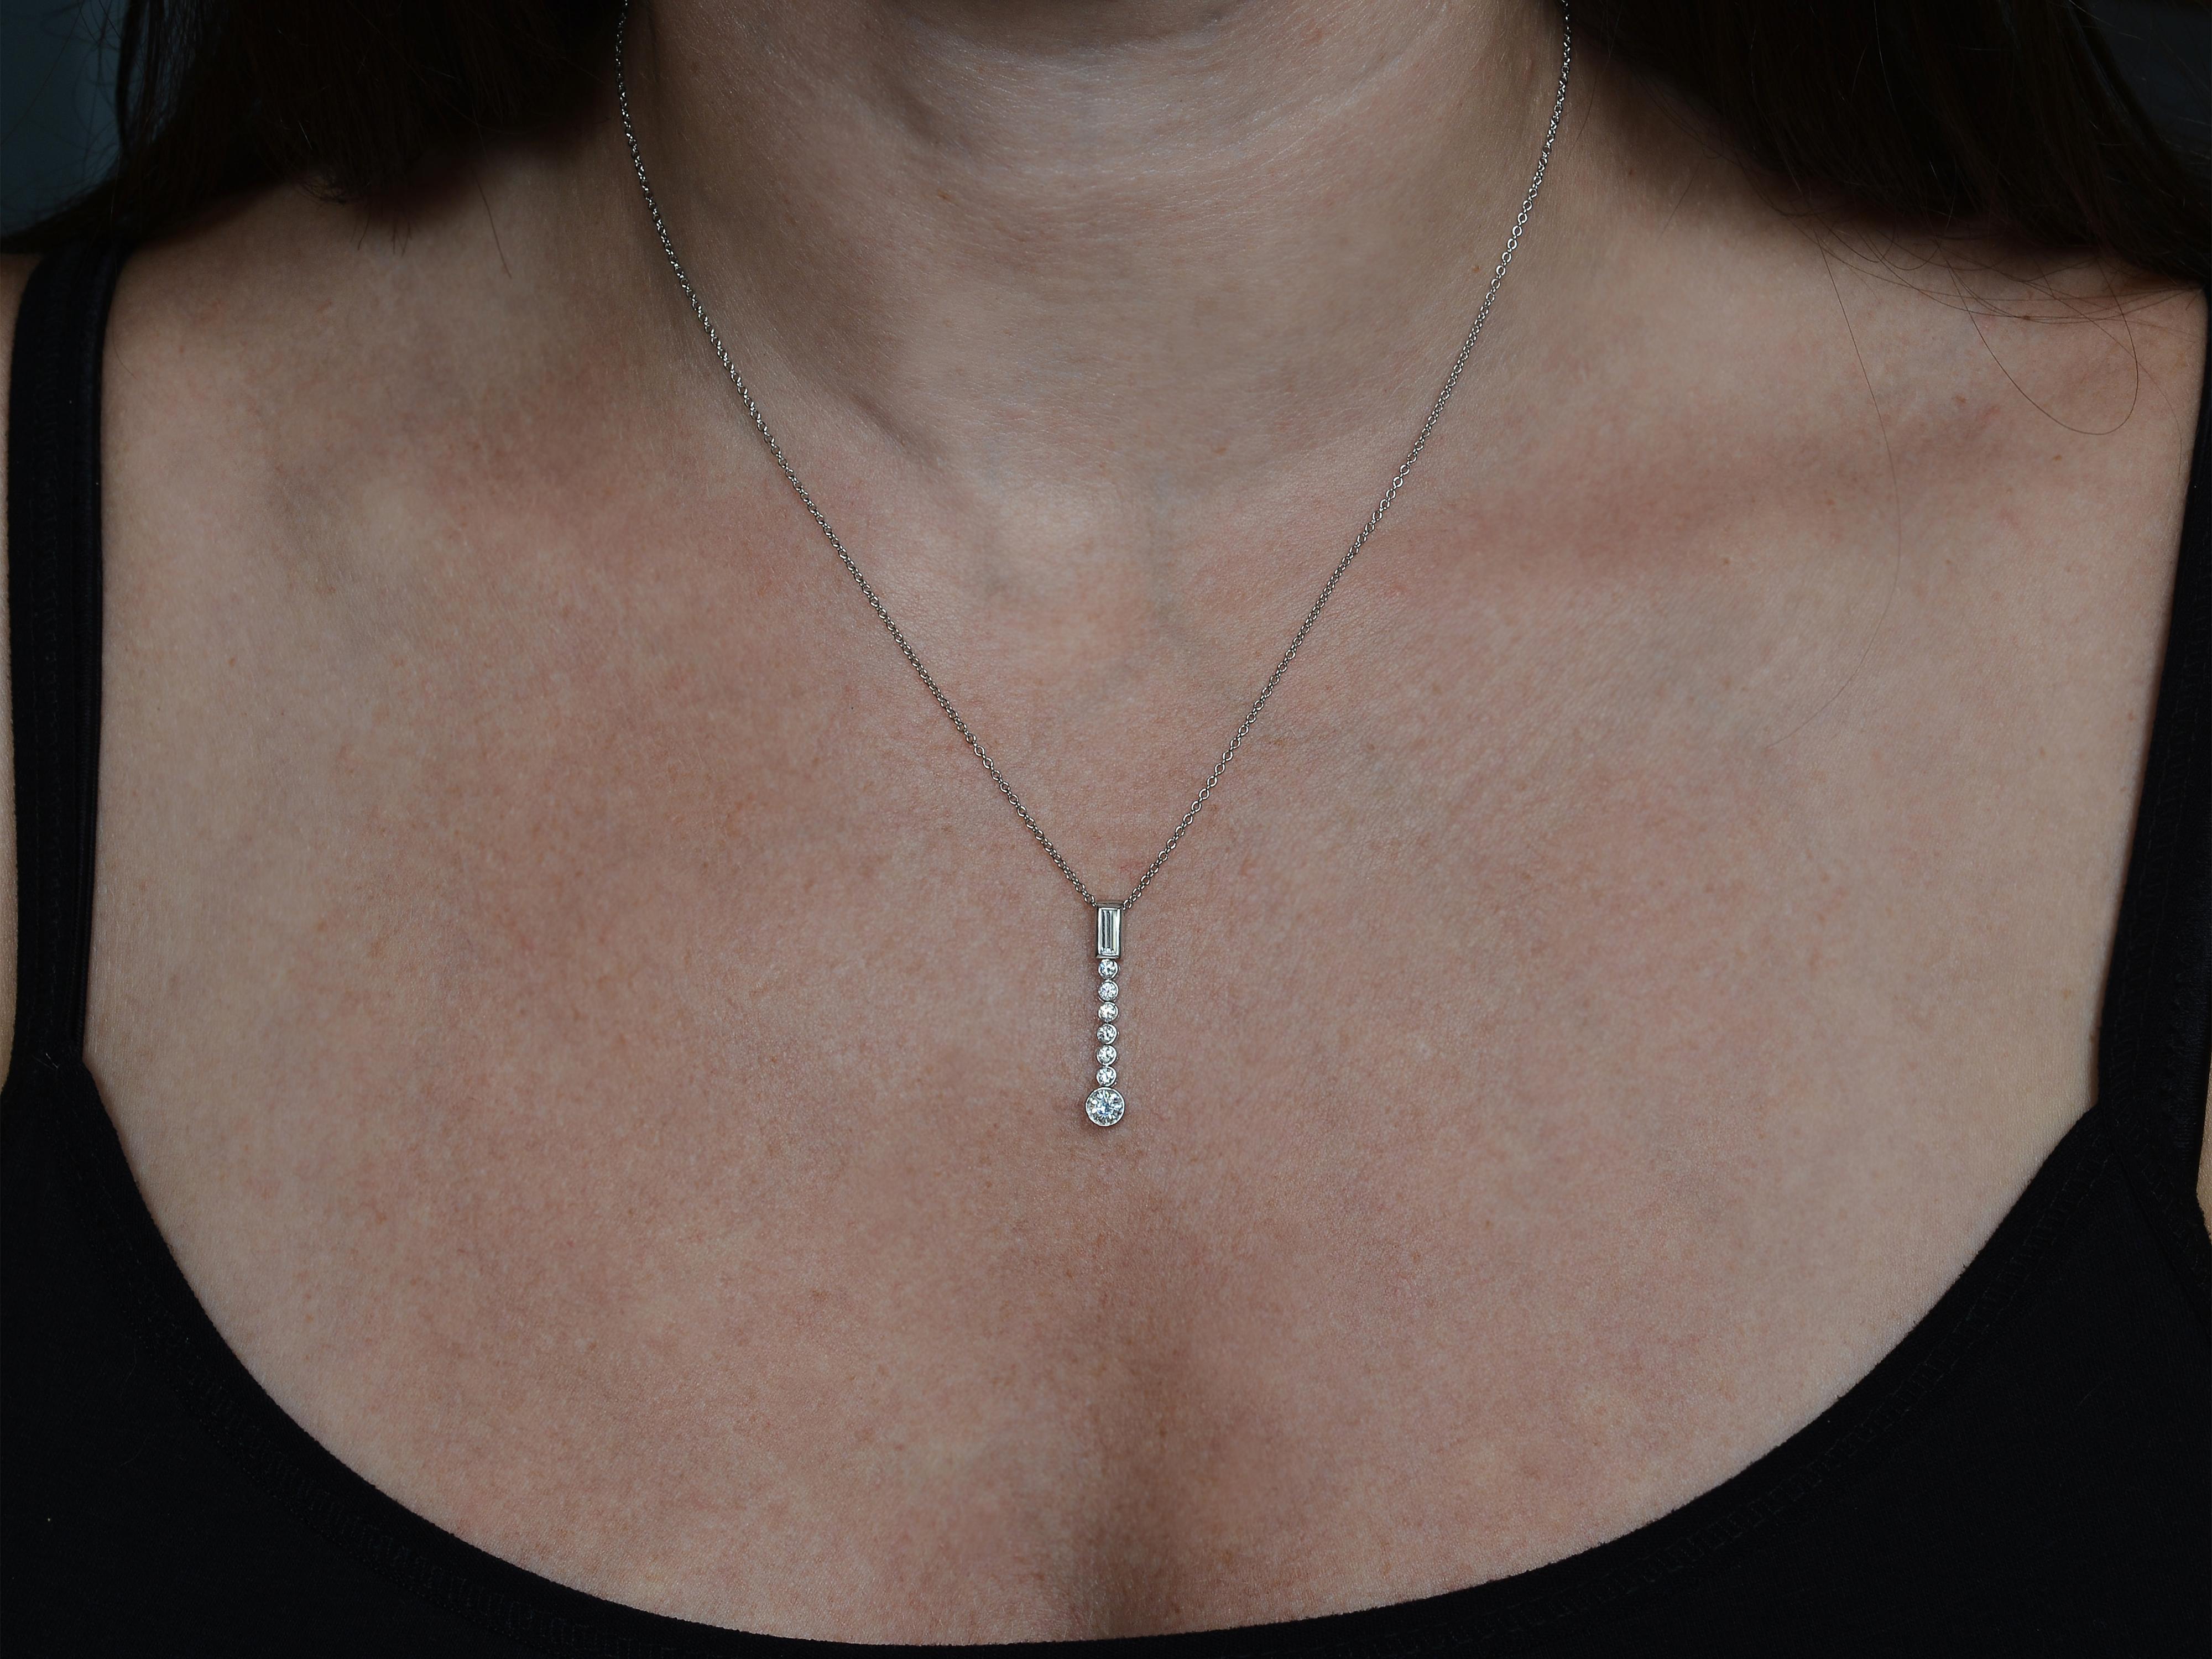 Platinum Tiffany & Co Diamond Necklace Featuring 7 Round Brilliant Cut Diamonds & 1 Baguette Cut Diamond of VS Clarity and F/G Color Totaling Approximately 0.50 Carats. 16 Inch Rolo/Cable Chain with 1 Inch Long Pendant. 